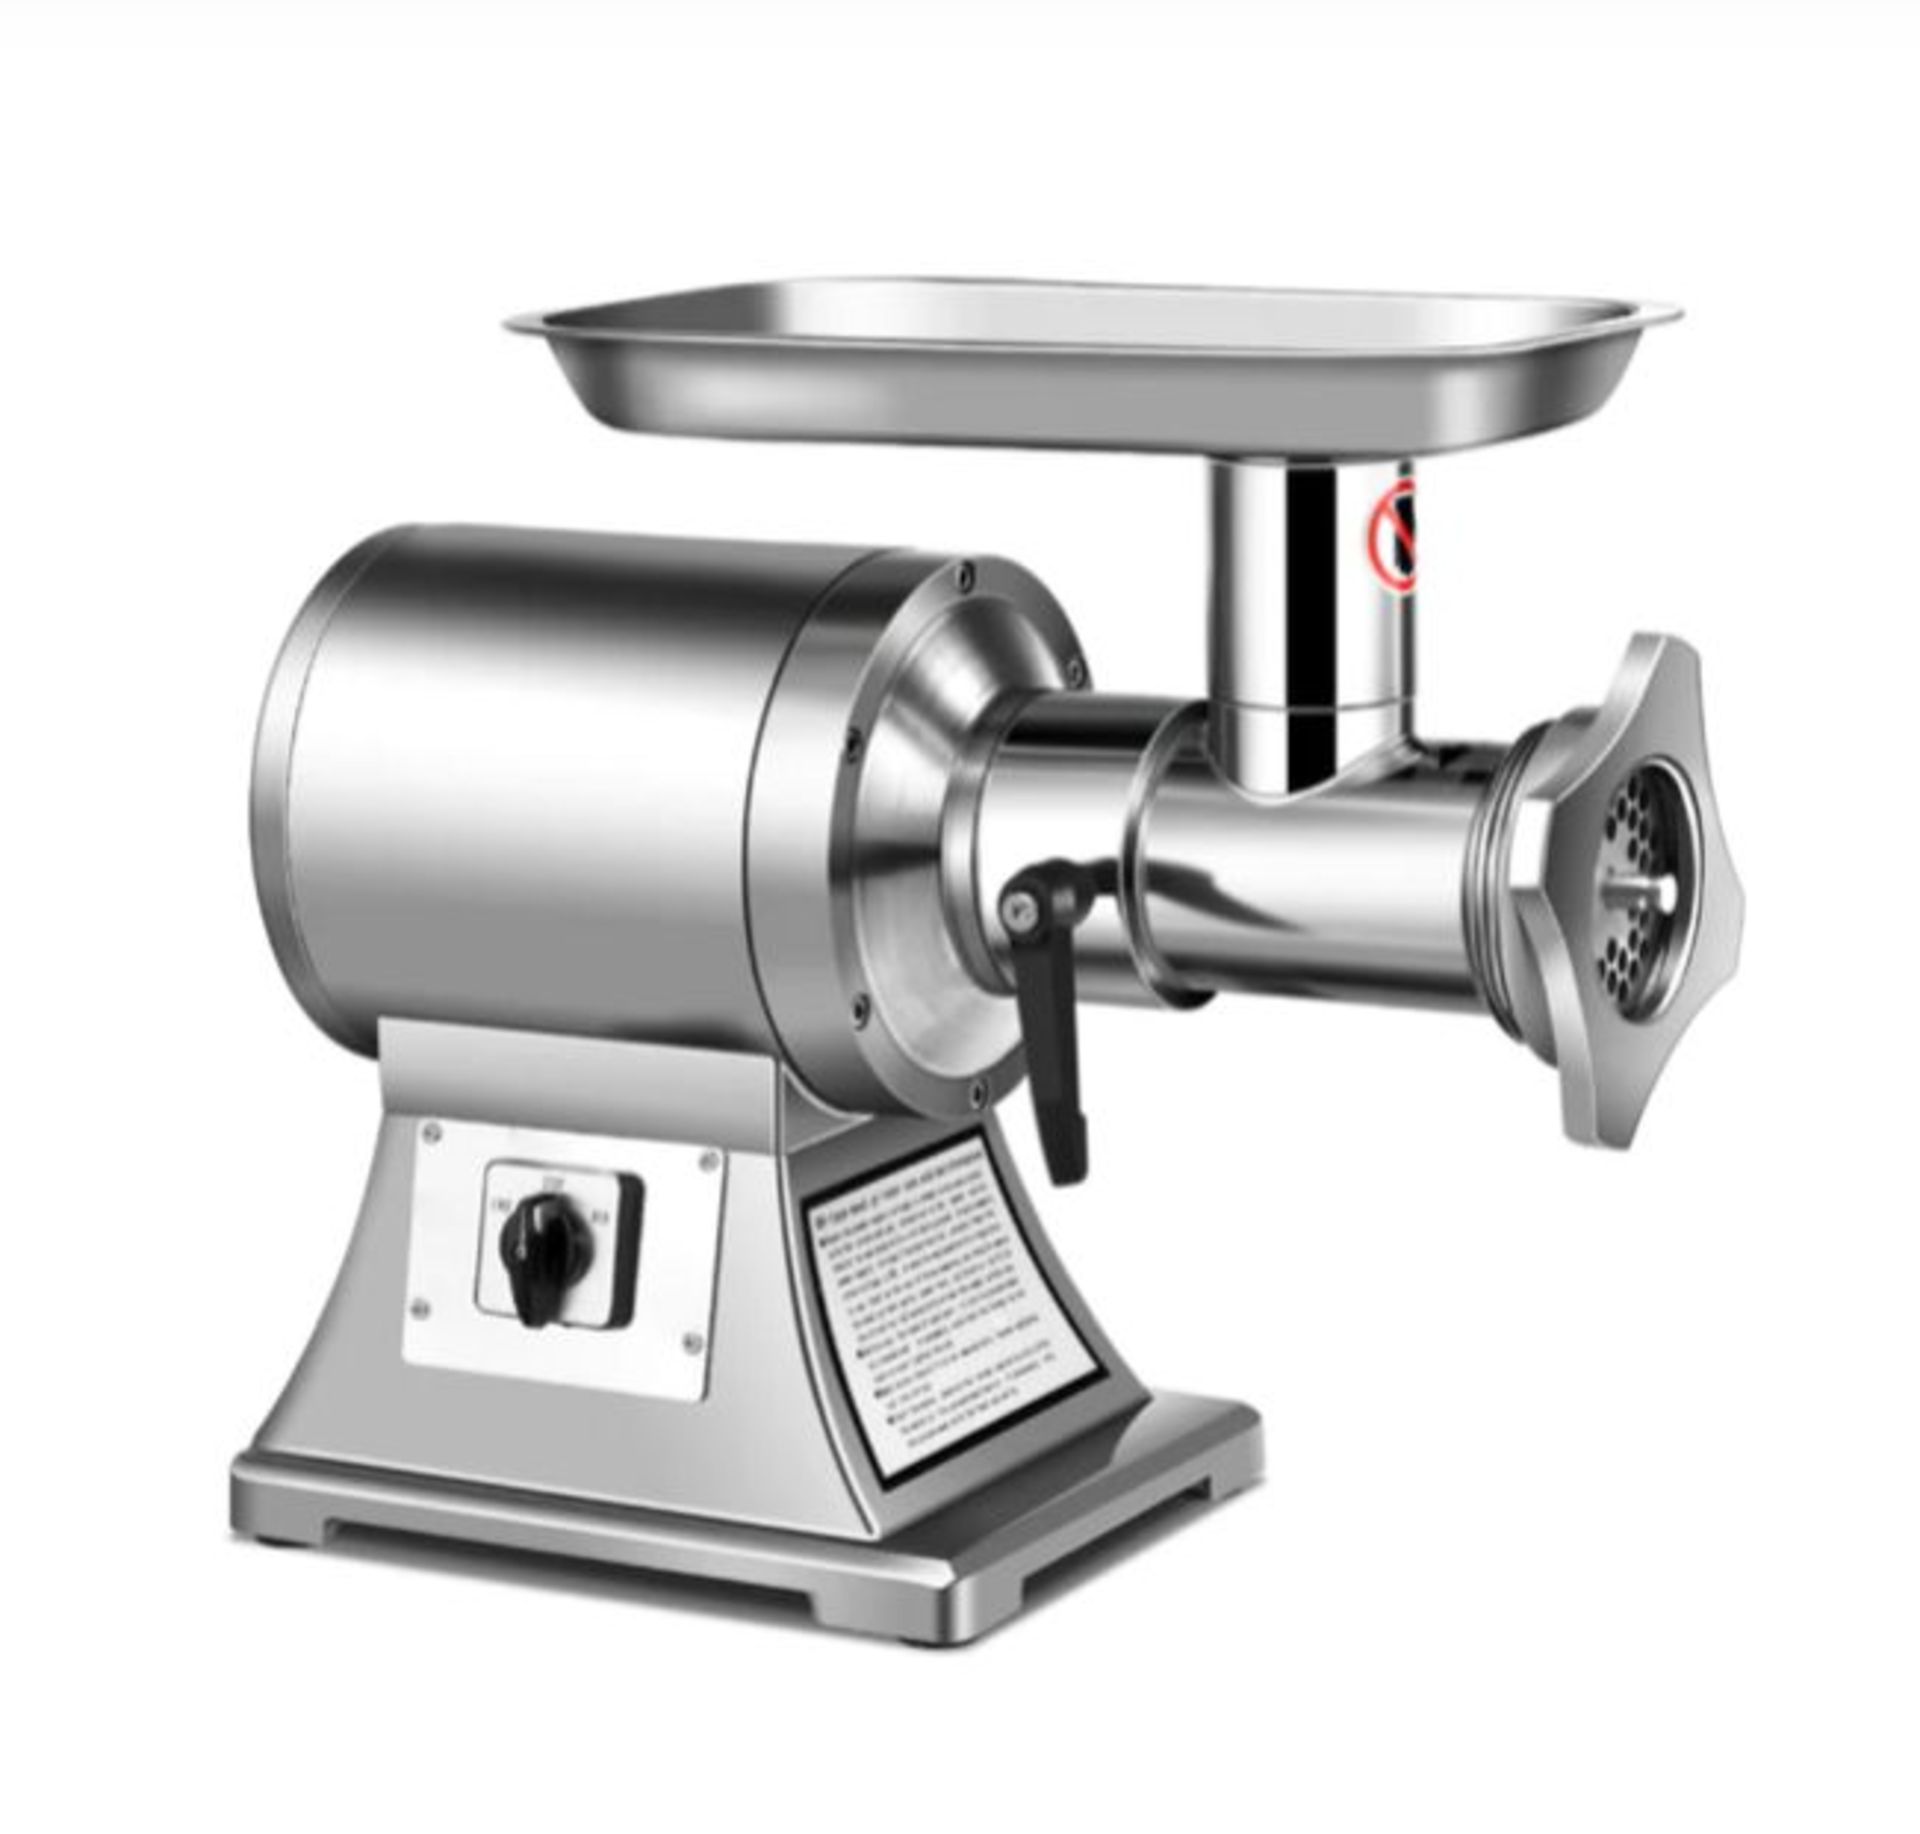 3-IN-1 MEAT MINCER AND SAUSAGE STUFFER MAKER-SILVER. - ER54. Equipped with a 750W copper motor, this